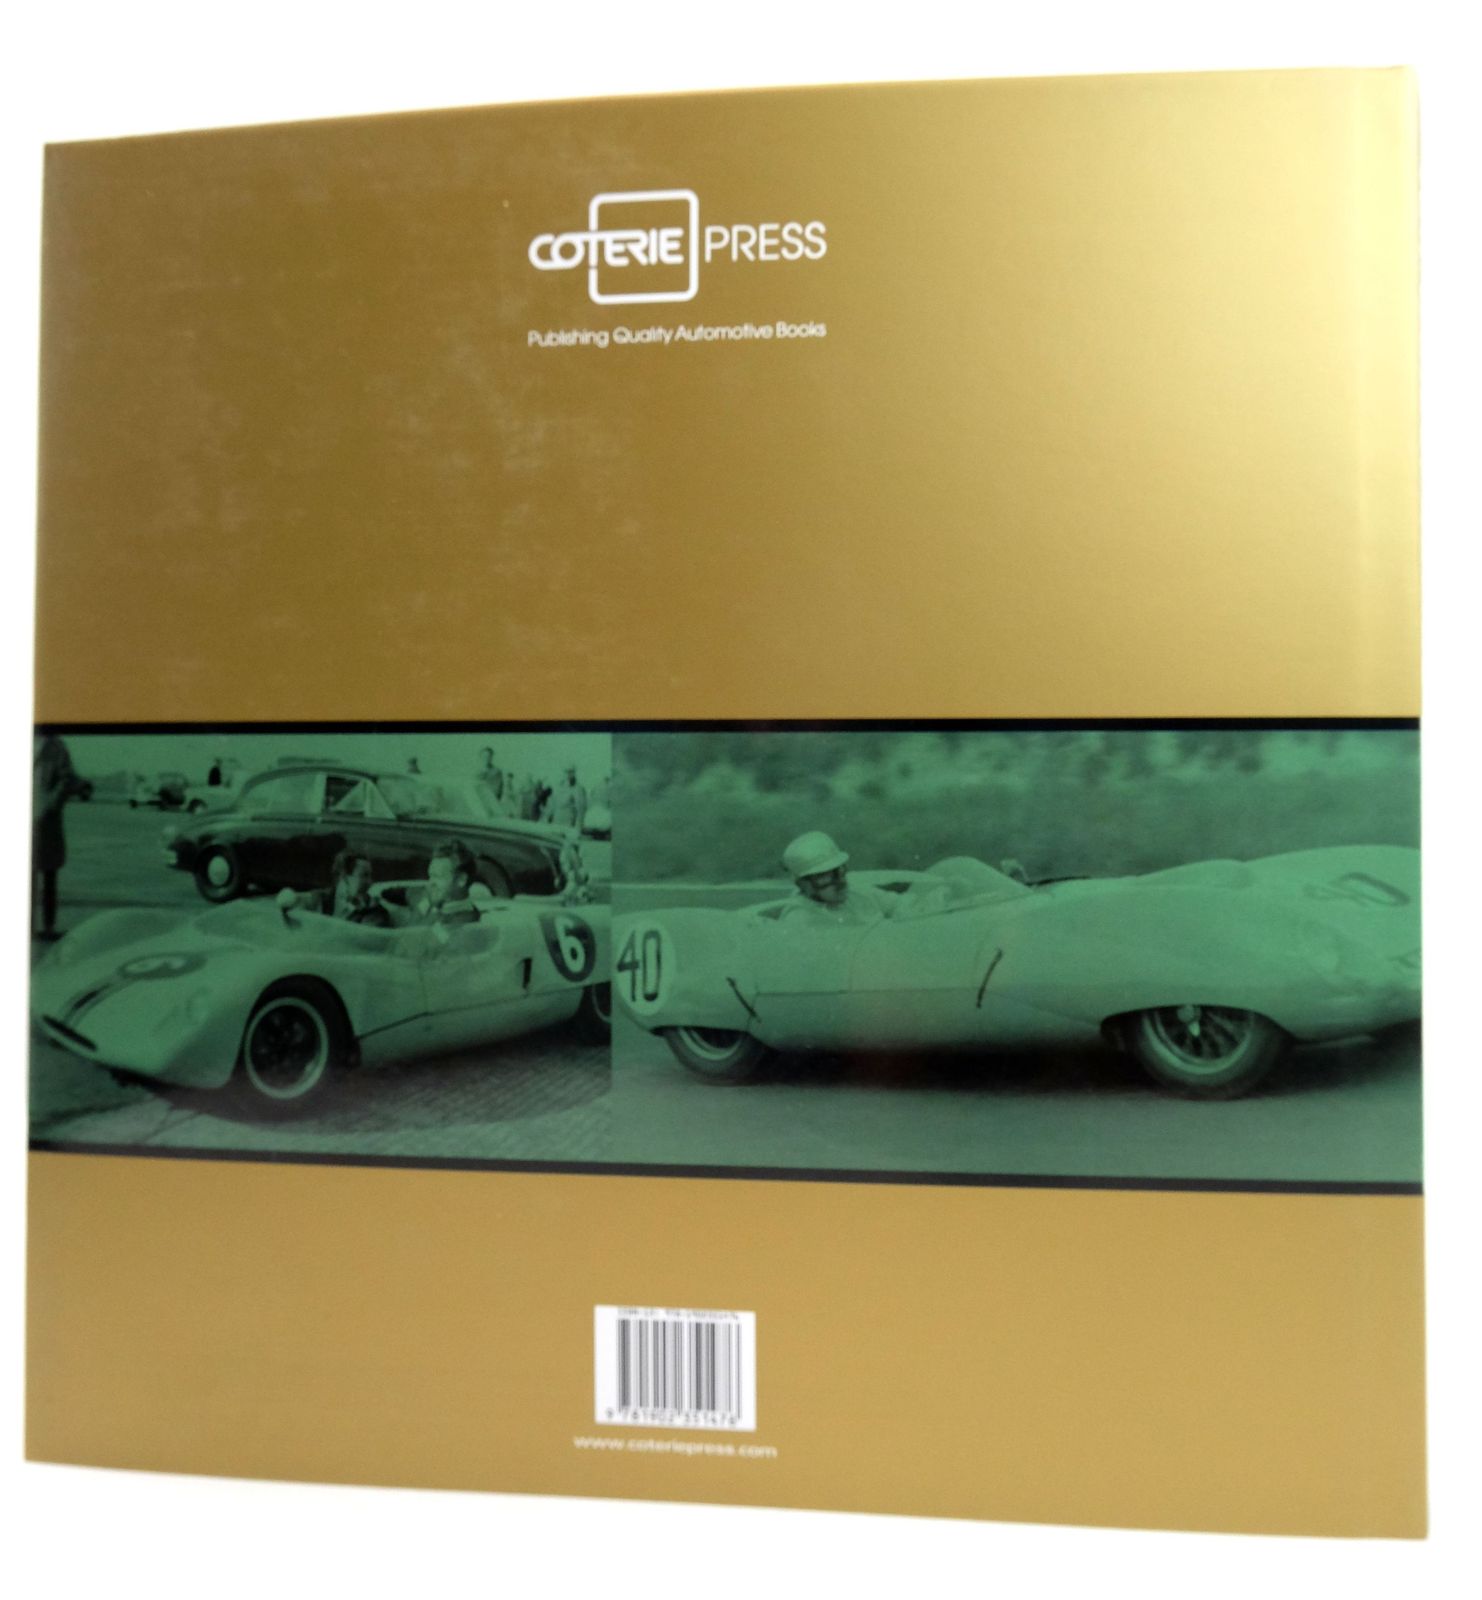 Photo of IAN WALKER RACING: THE MAN AND HIS CARS written by Balme, Julian published by Coterie Press Limited (STOCK CODE: 1819501)  for sale by Stella & Rose's Books